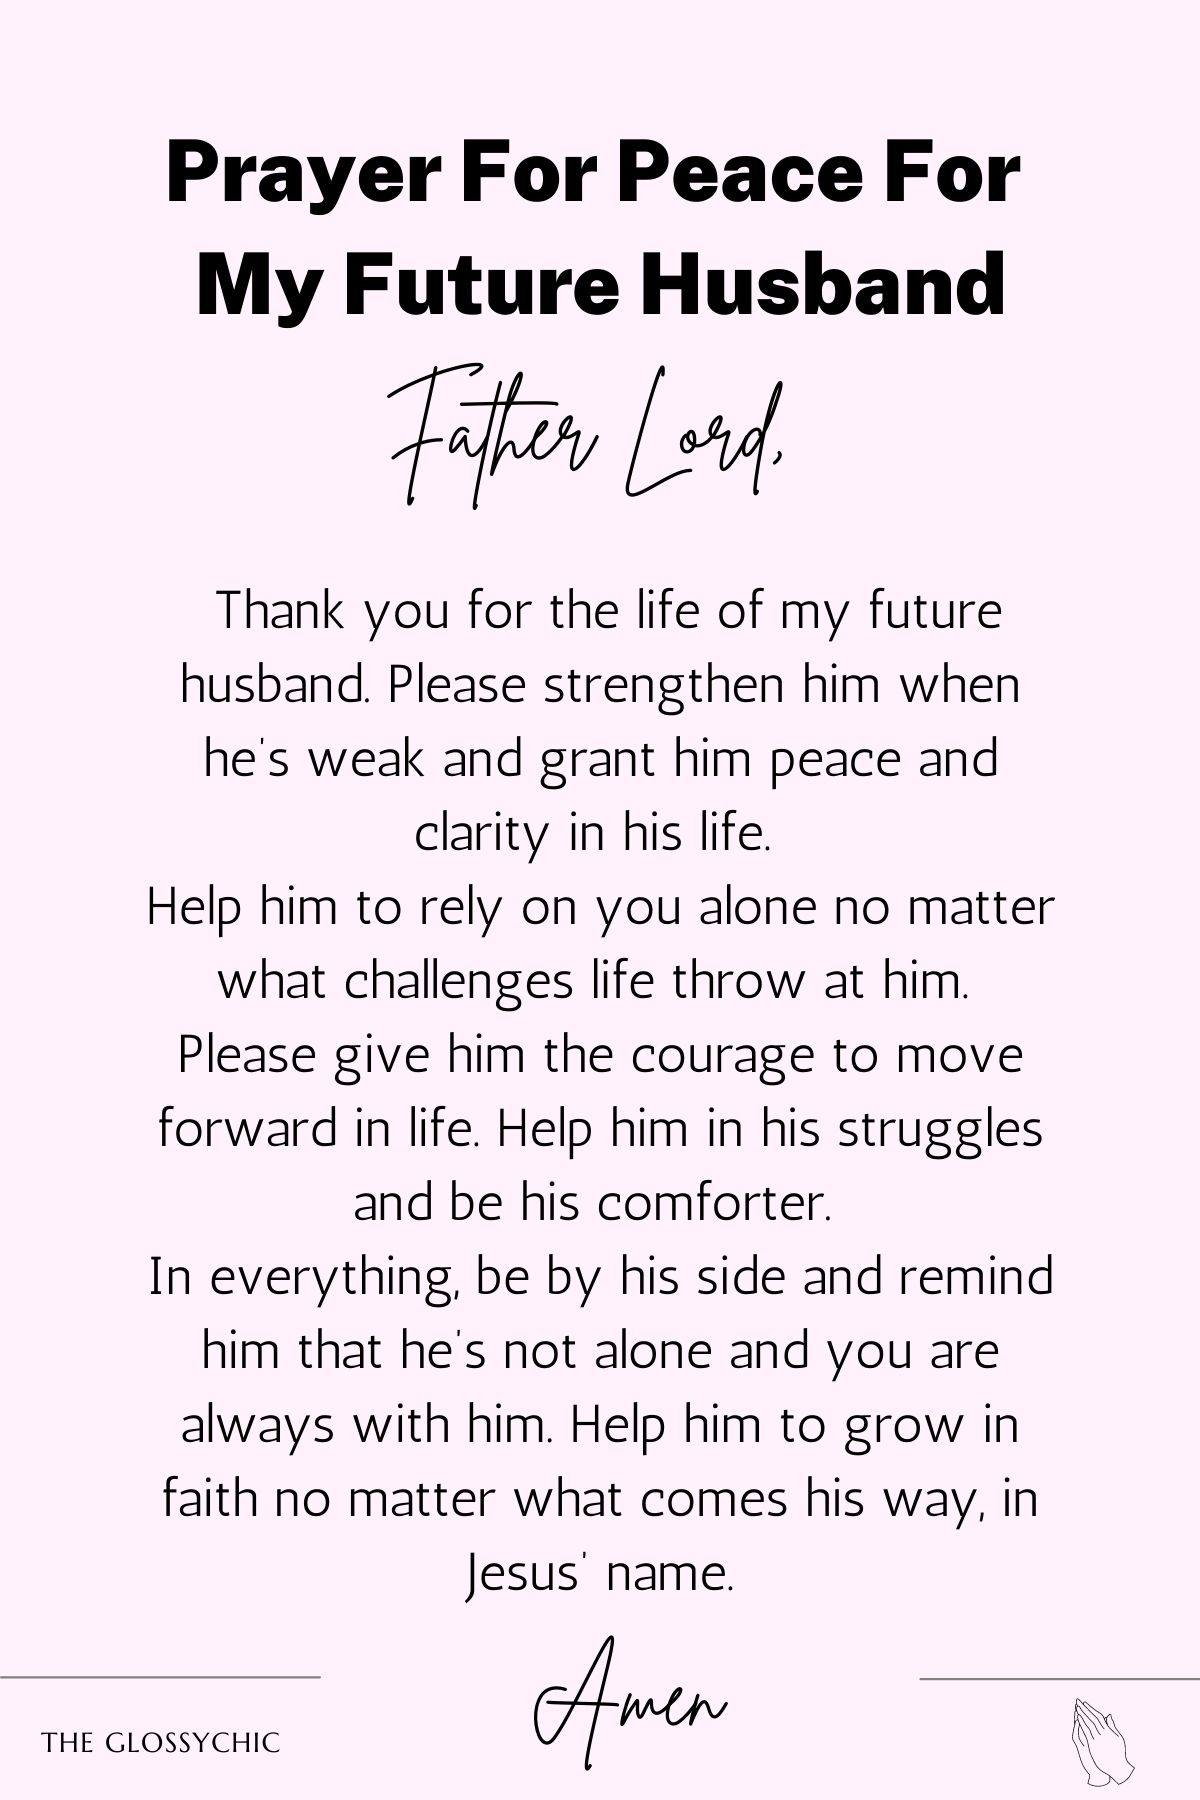 Prayer for peace for my future husband